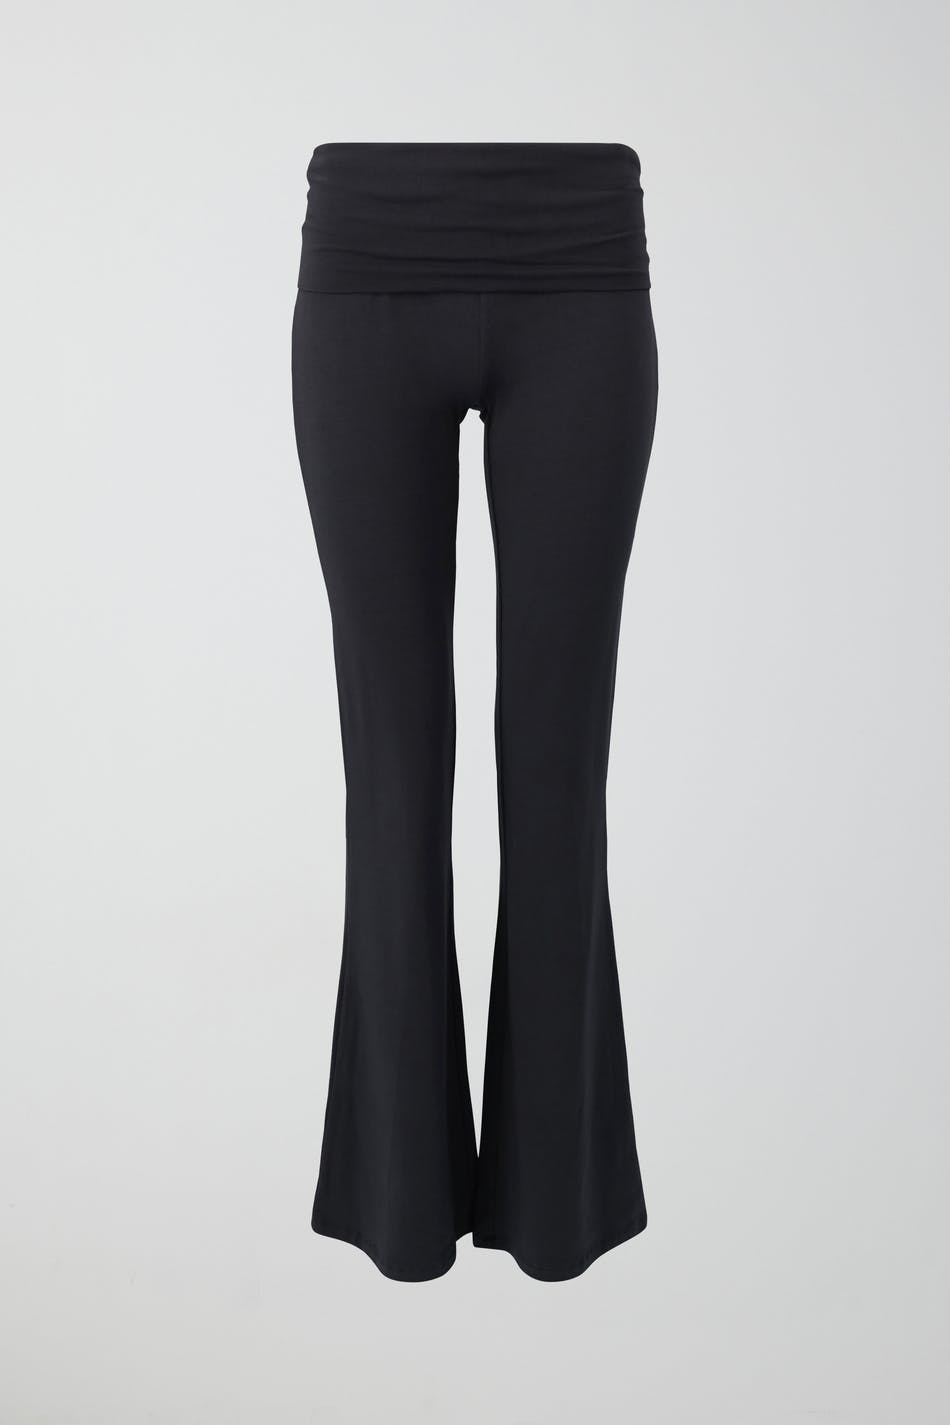 Soft touch petite trouser